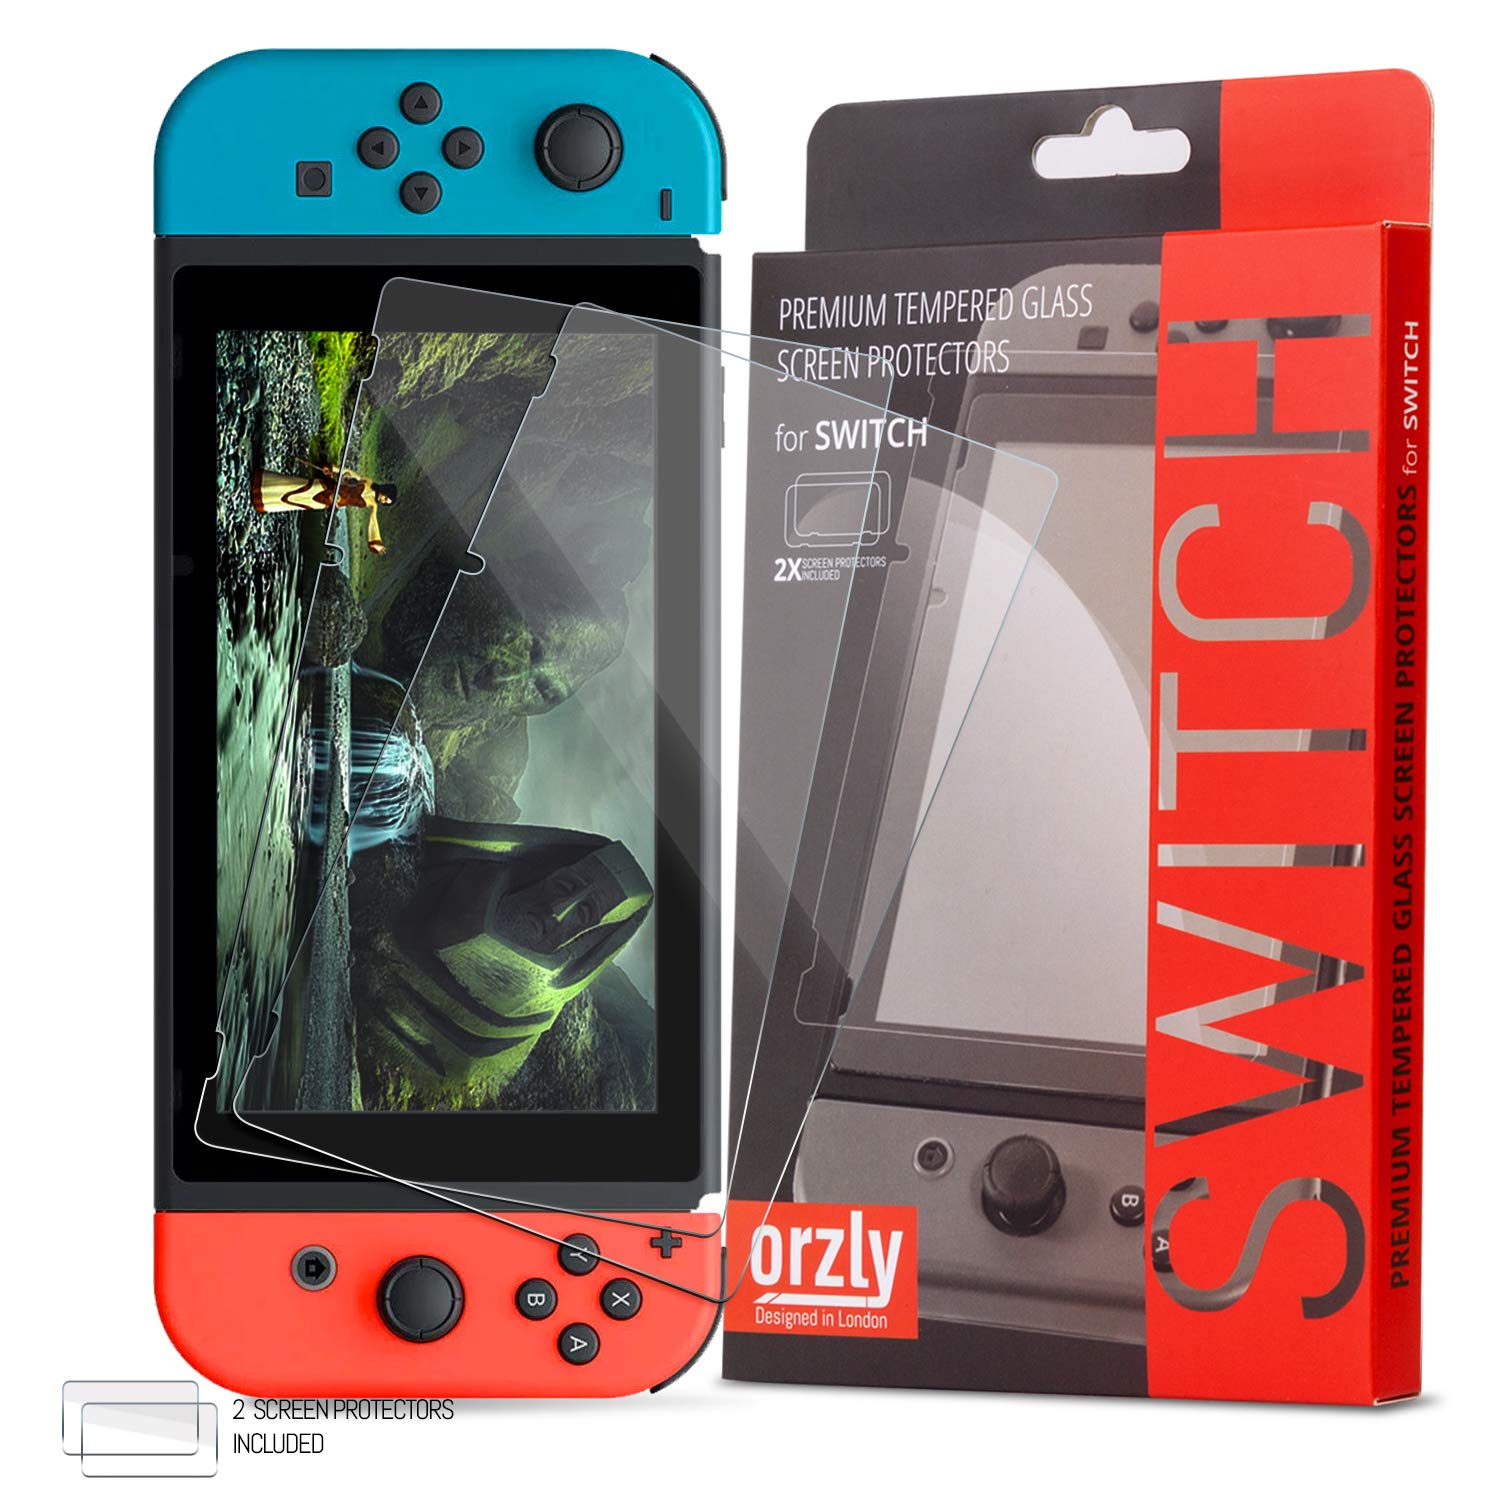 Orzly Glass Screen Protectors & VR Headset for Nintendo Switch